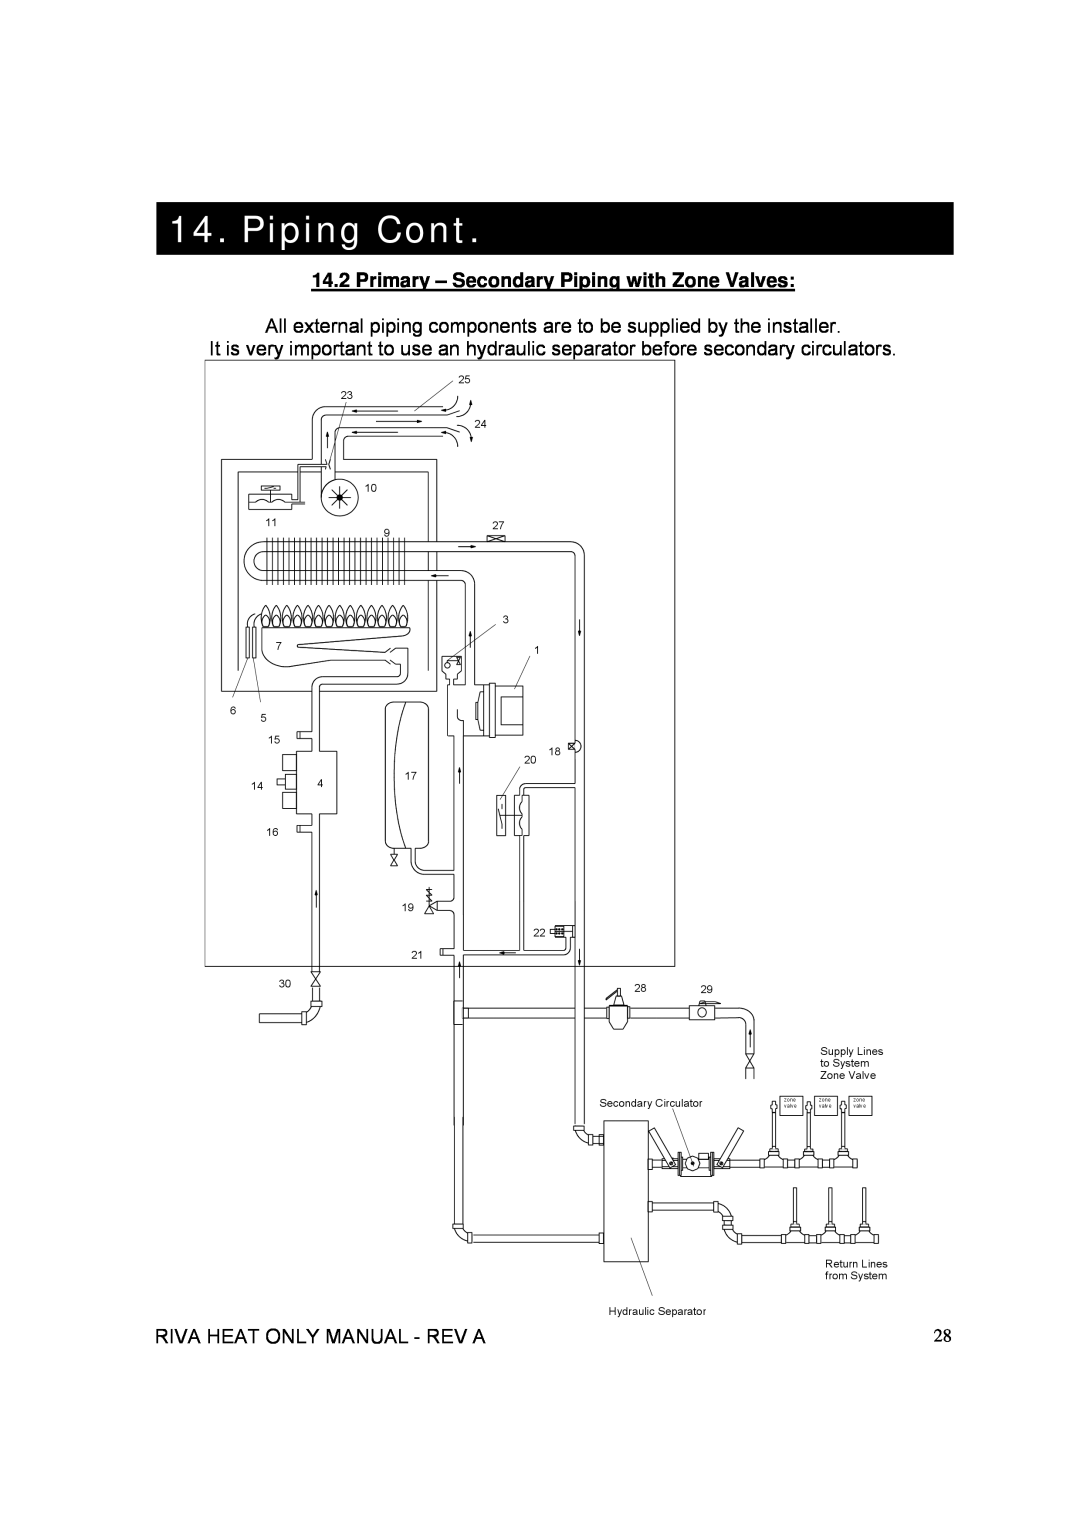 Verona WALL HUNG GAS BOILER manual Piping Cont, 14.2Primary - Secondary Piping with Zone Valves 